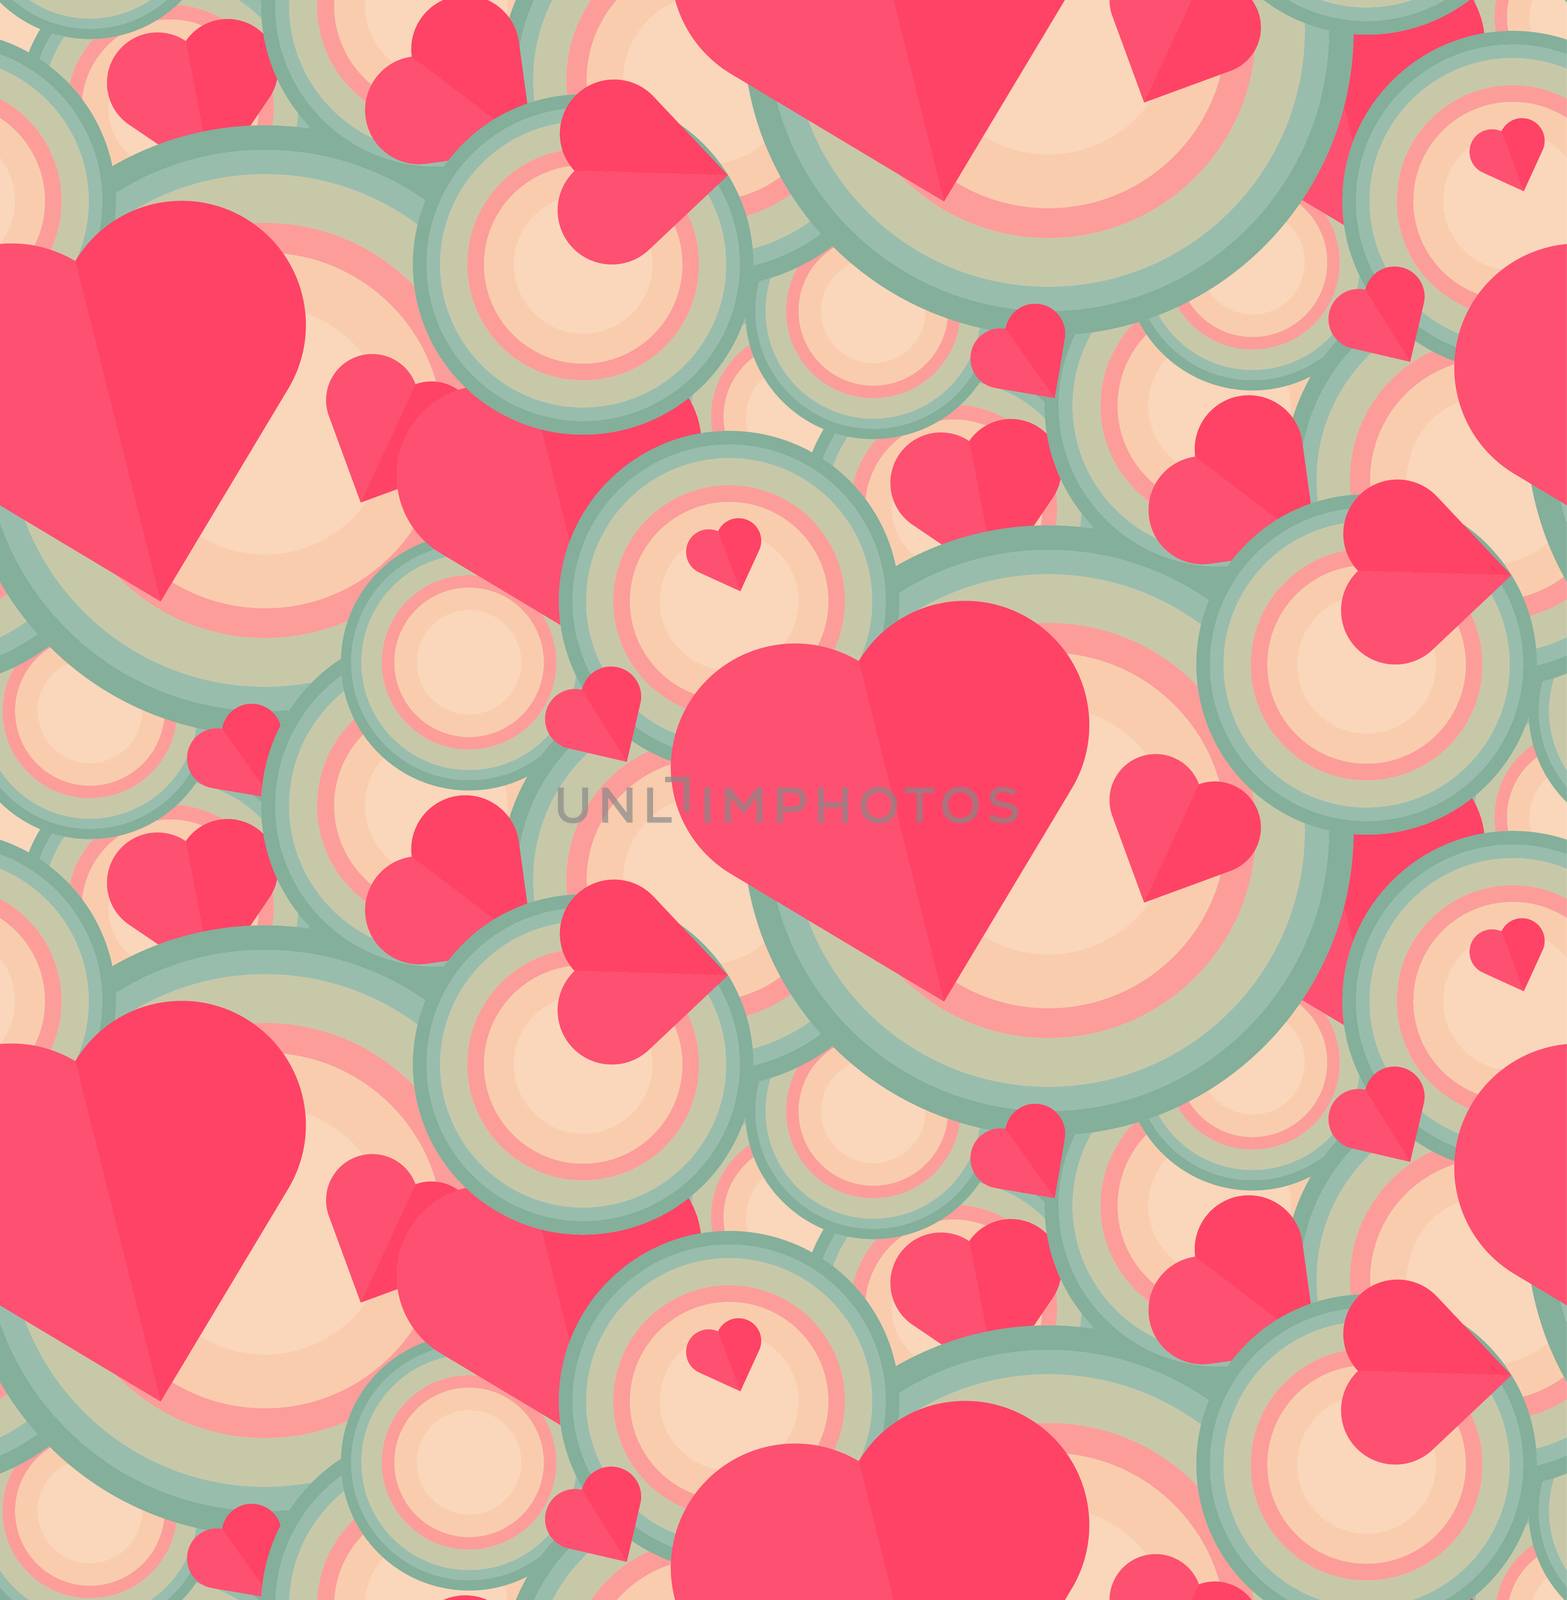 Vintage Seamless Romantic Pattern for Wrap, Print, Fabric, Textile, Greeting Card. Ornament with pink or red heart, circle for cloth, wallpaper, mosaic. Wedding, valentine retro background. Vector